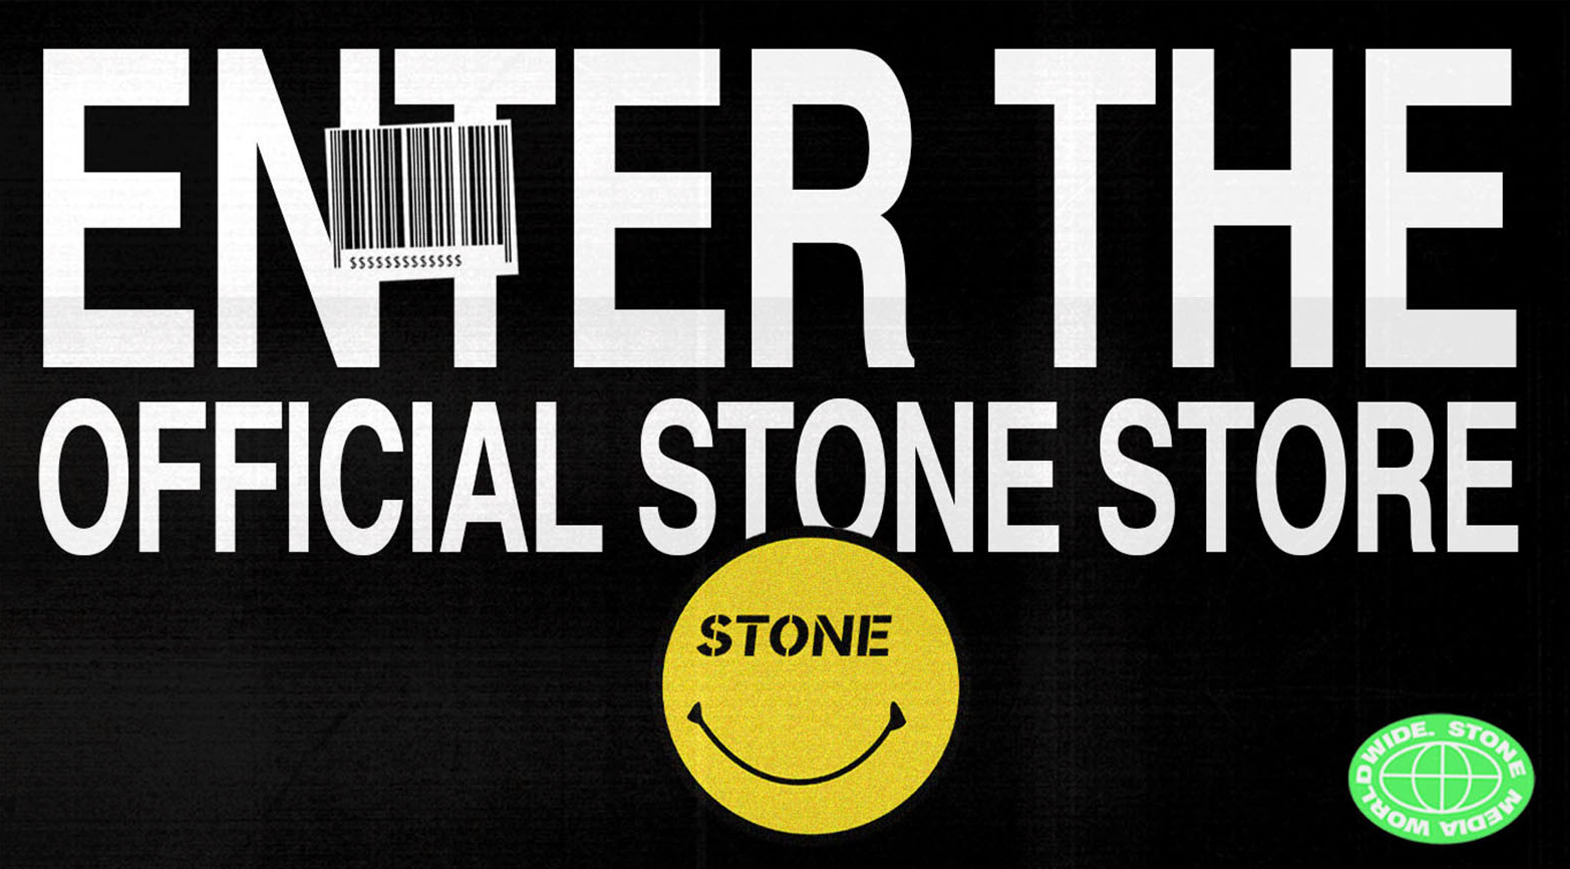 Enter the Official Stone Store